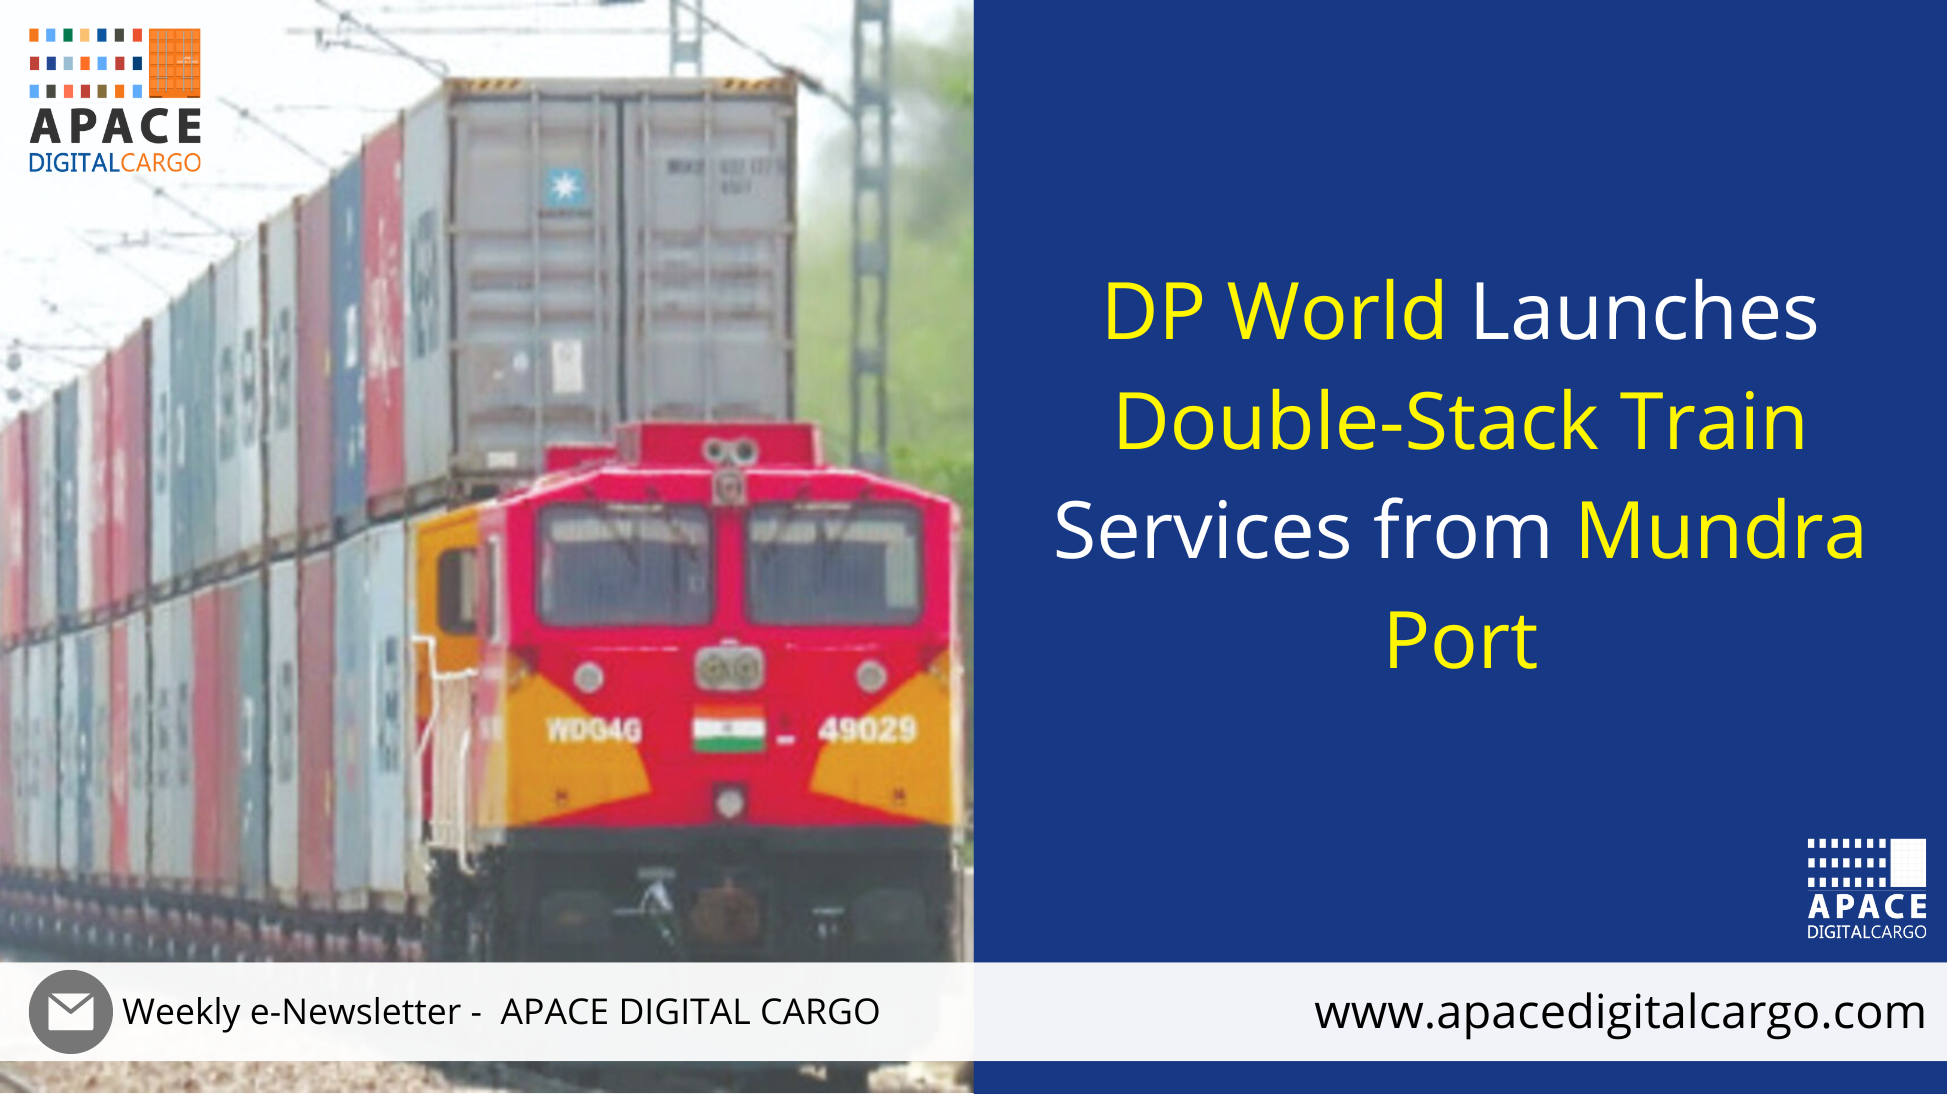 DP World Launches Double-Stack Train Services from Mundra Port